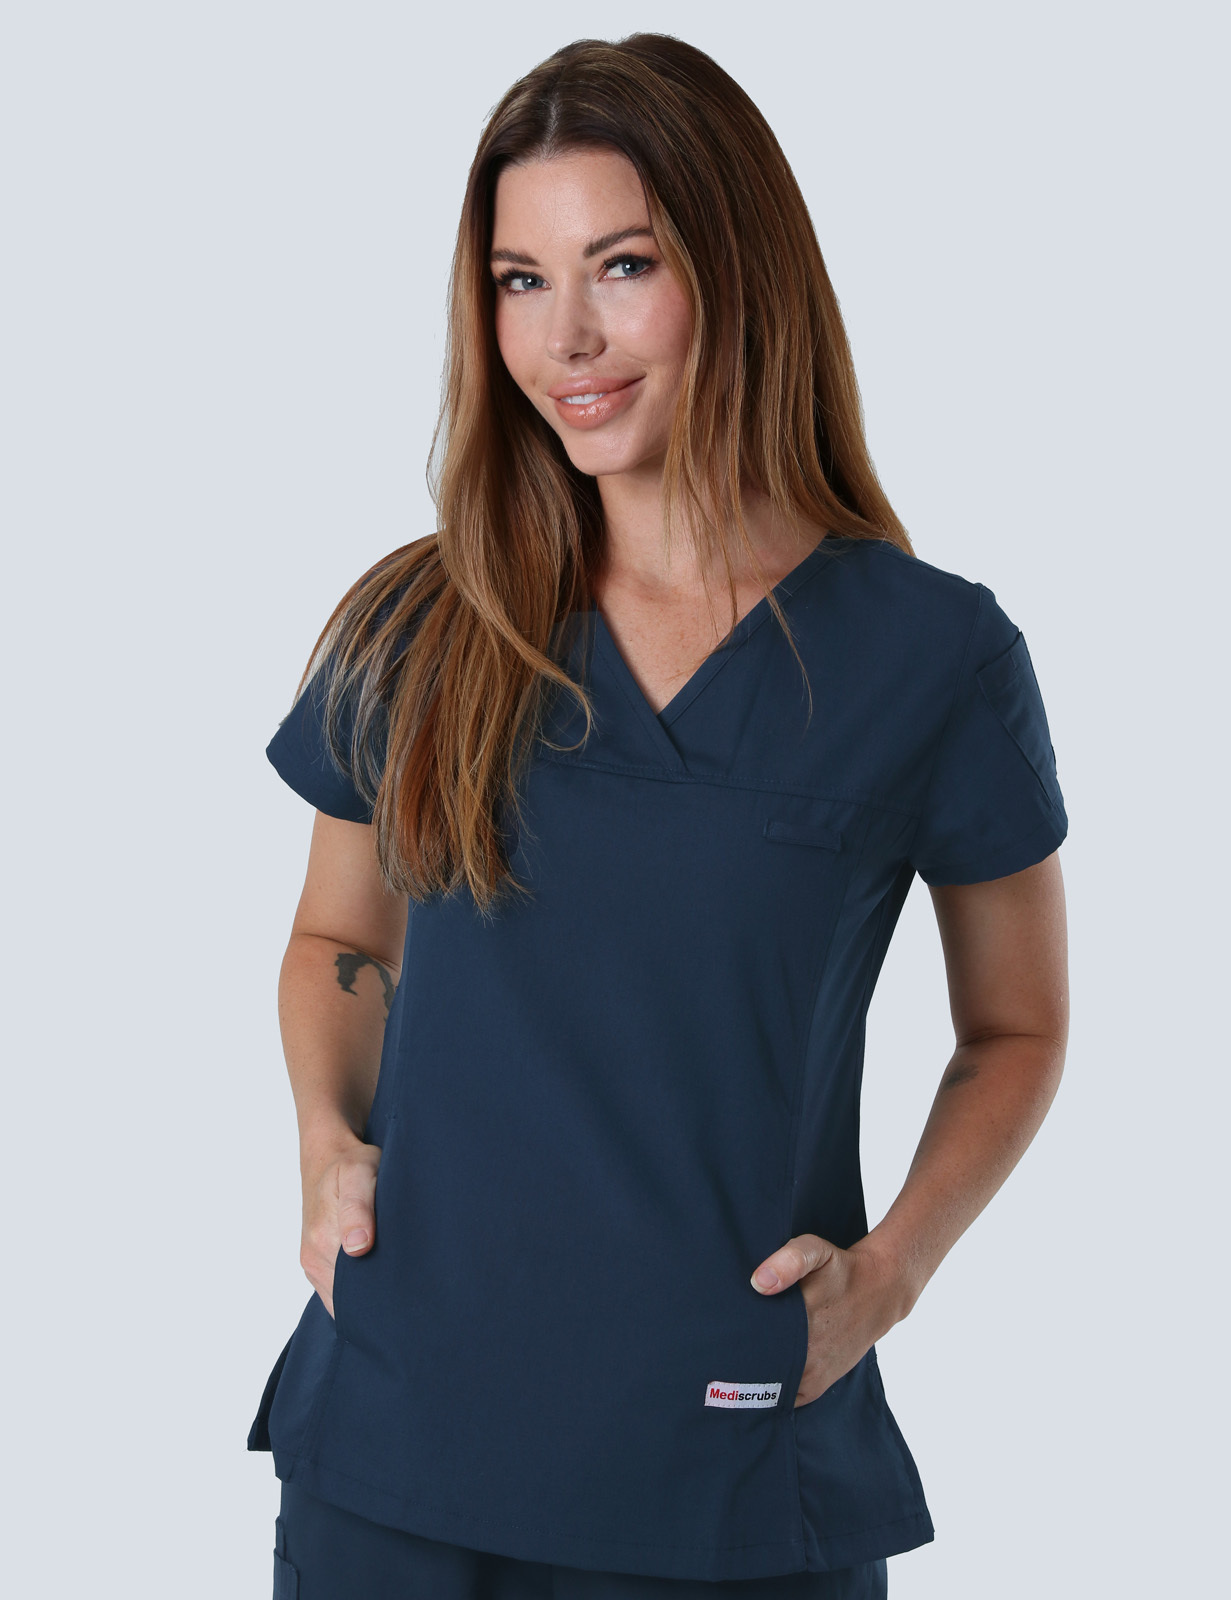 Royal Hobart Hospital Emergency Department Specialist Uniform Set Bundle (Women's Fit Top and Cargo Pants in Navy  incl Logo)